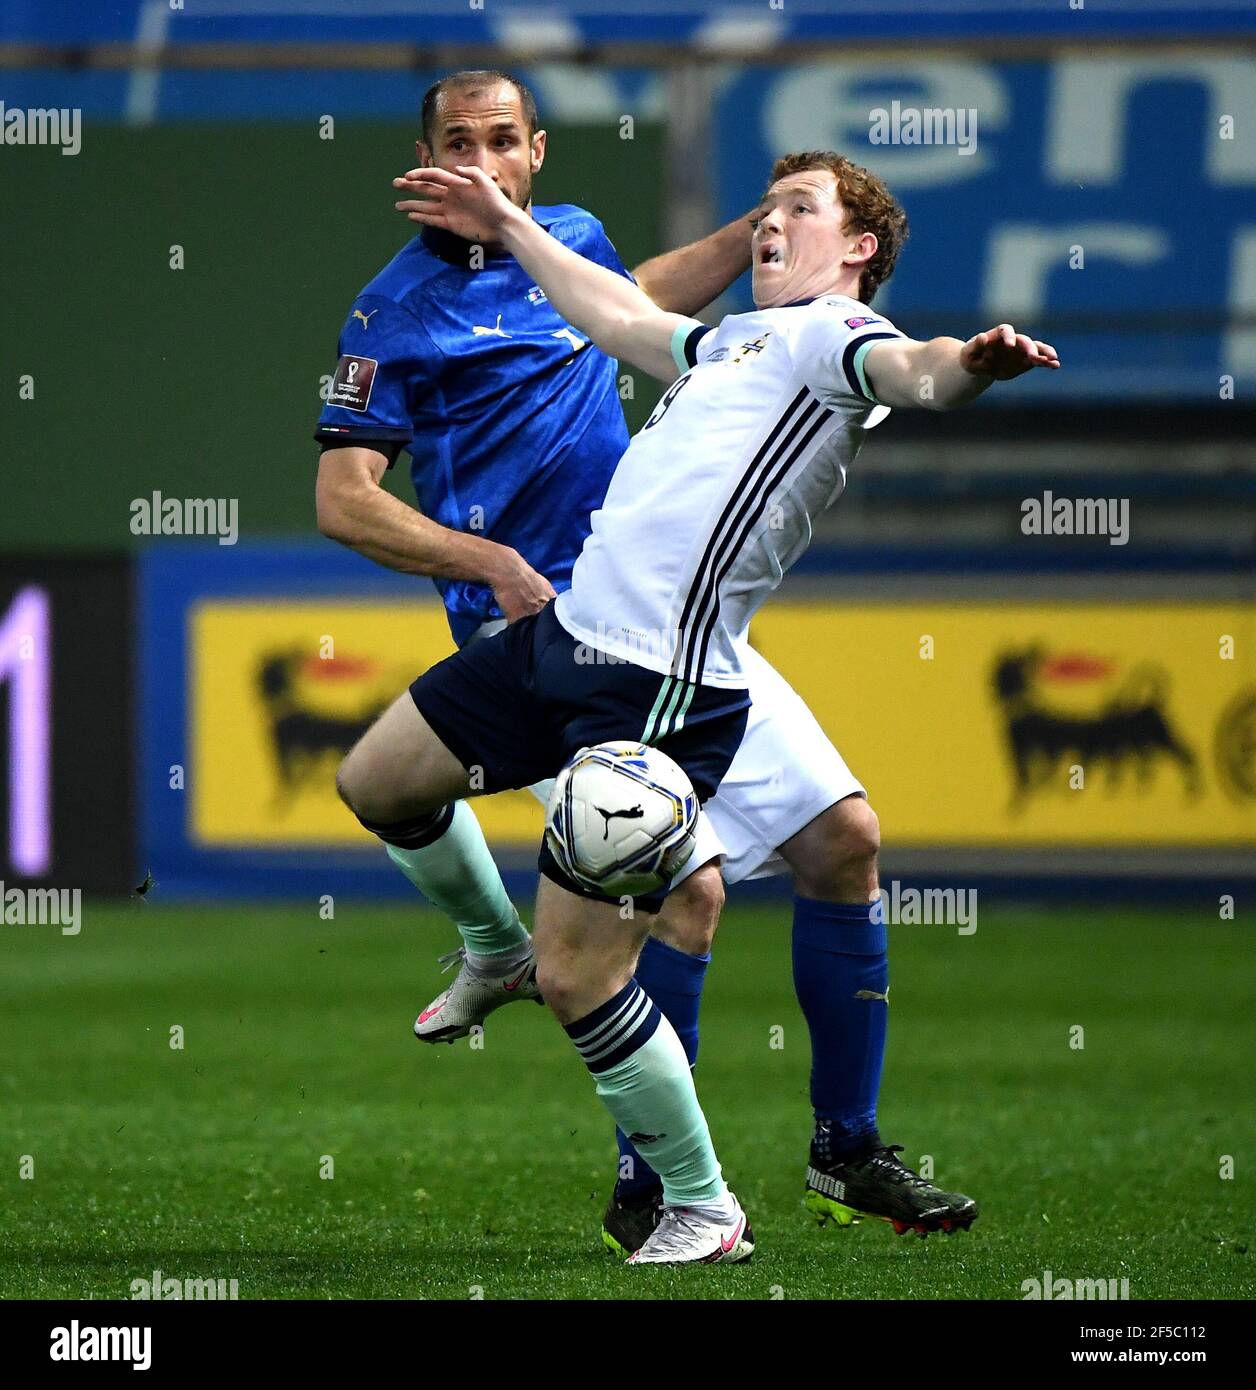 Parma. 26th Mar, 2021. Italy's Giorgio Chiellini (L) vies with Northern Ireland's Shayne Lavery during the FIFA World Cup 2022 qualifier Group C match between Italy and Northern Ireland in Parma, Italy, March 25, 2021. Credit: Xinhua/Alamy Live News Stock Photo